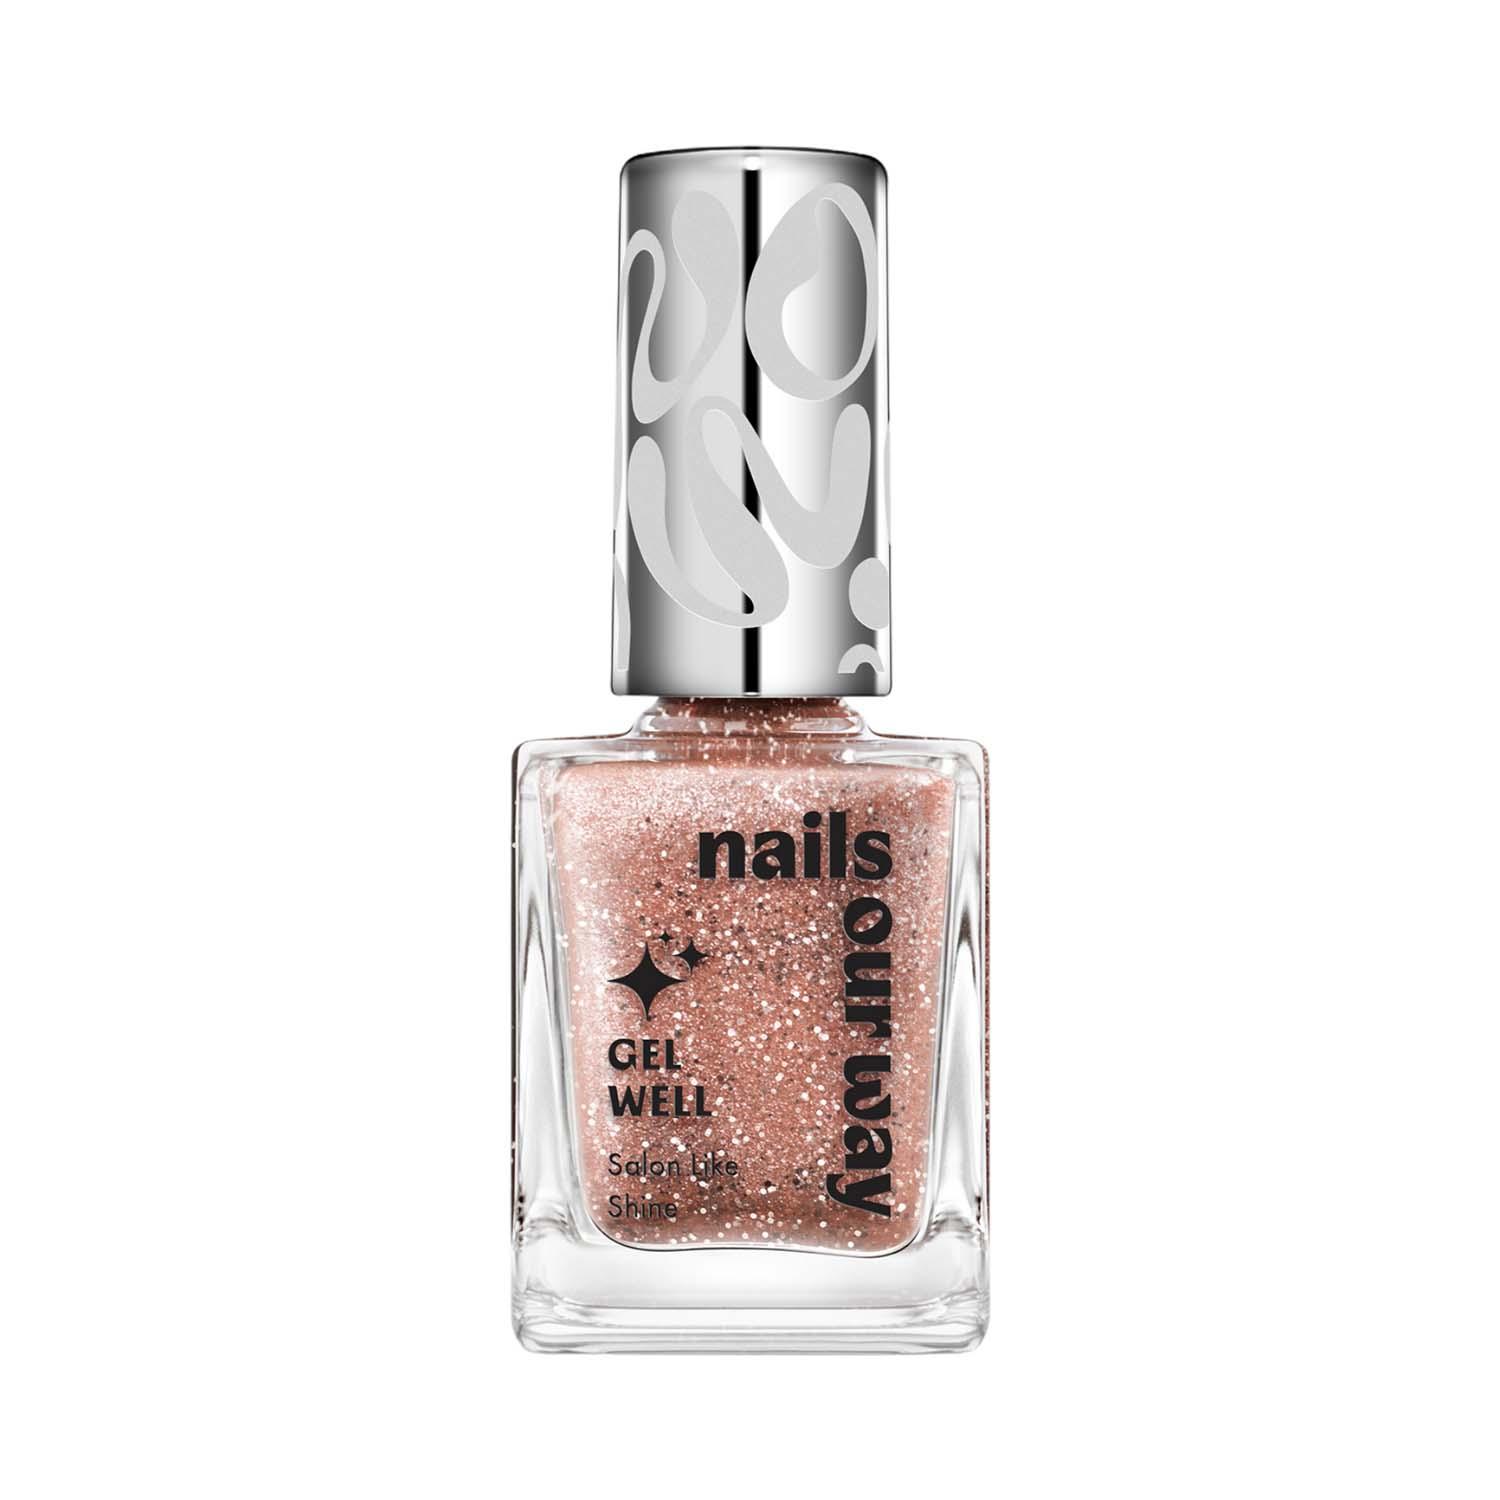 Nails Our Way | Nails Our Way Gel Well Nail Enamel - 508 Marvelous (10 ml)